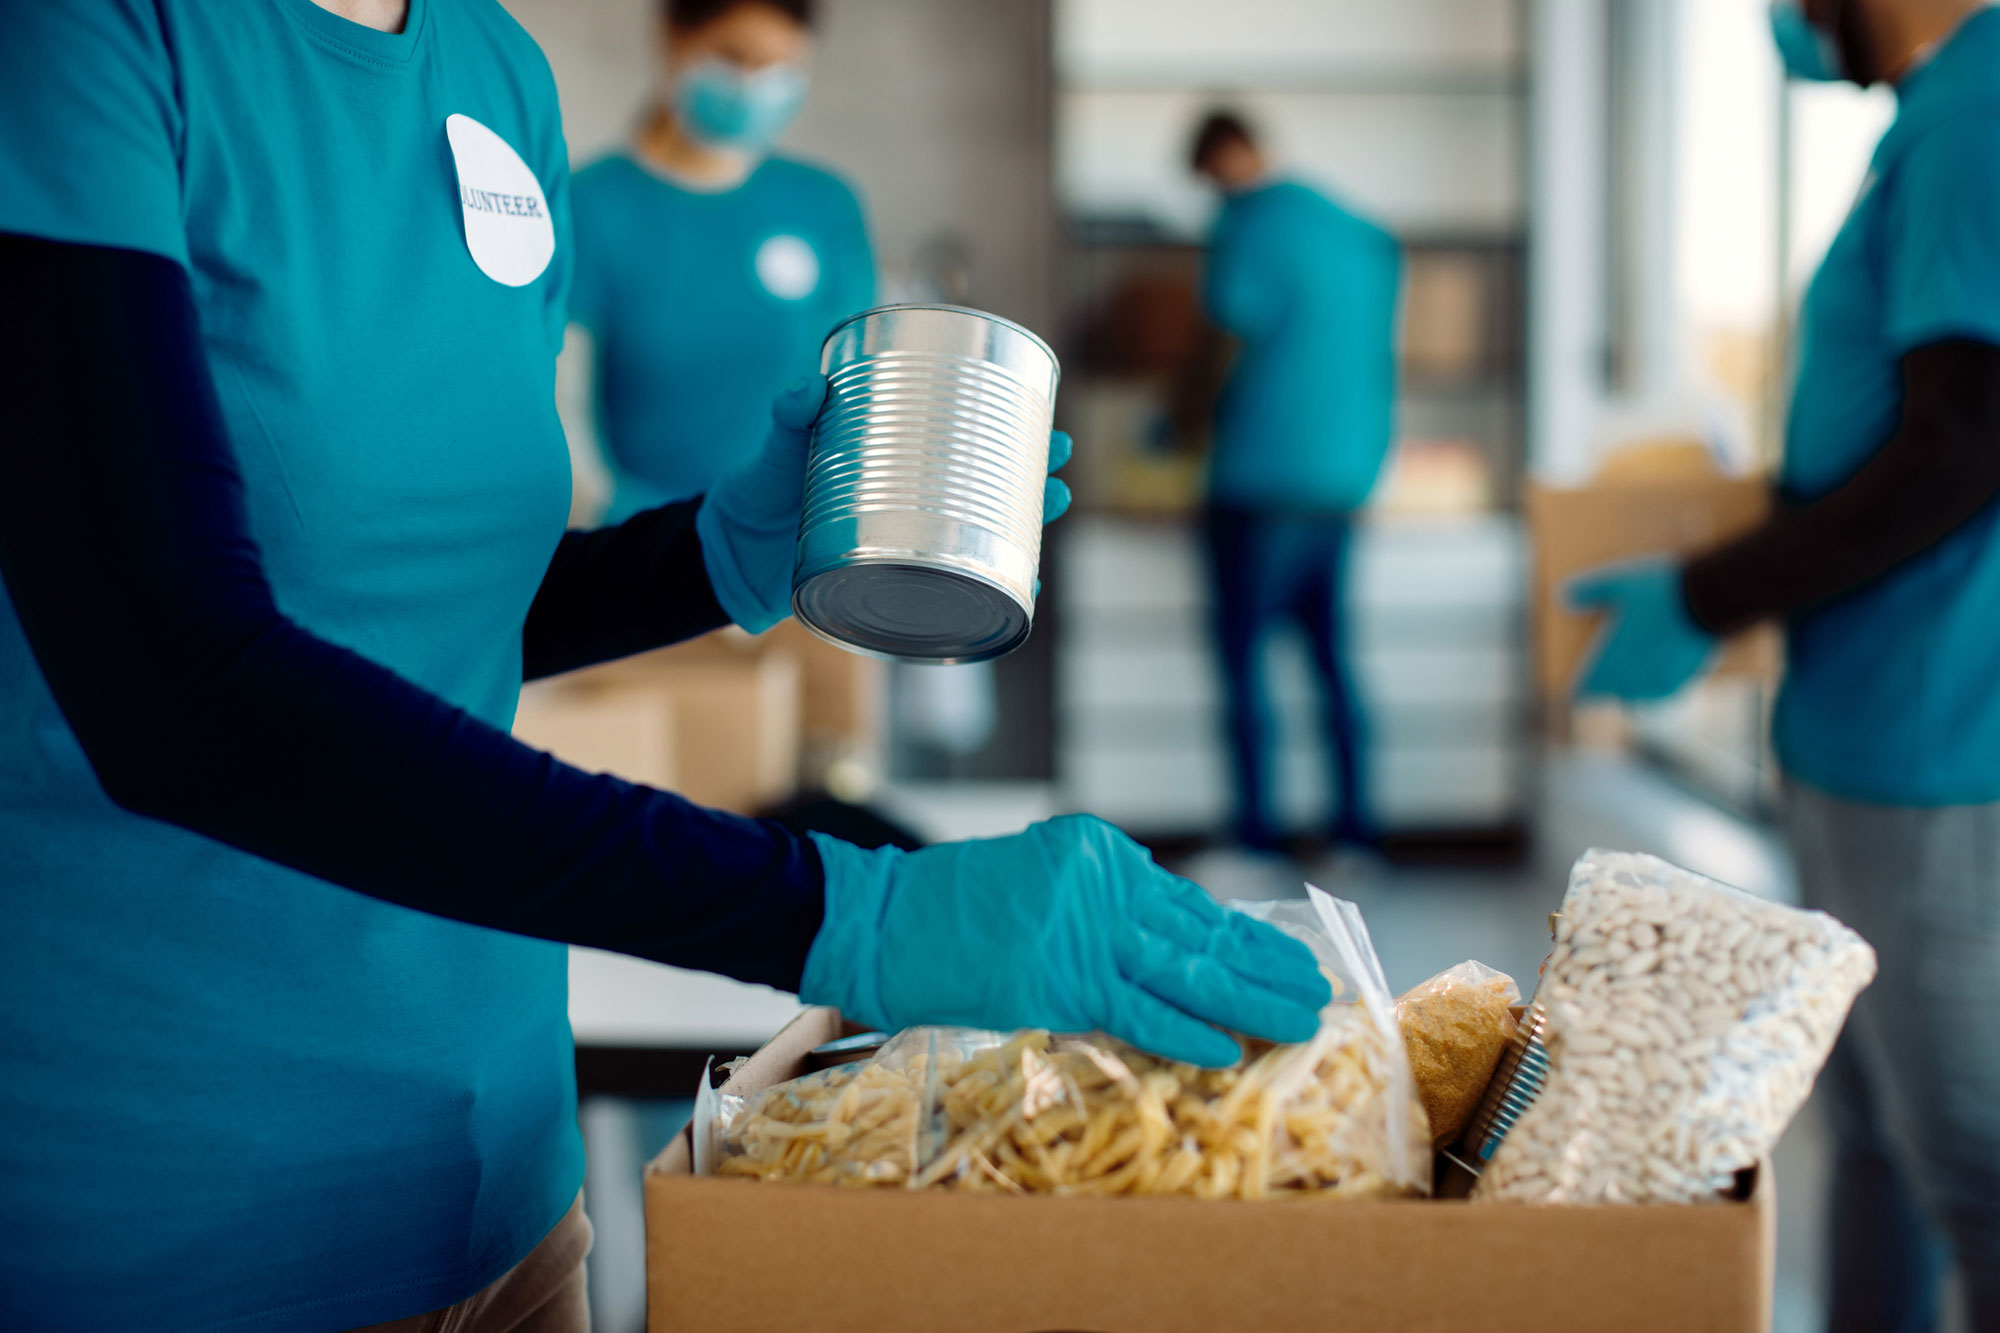 How Greater Boston Food Bank’s NetSuite Implementation Transformed Operations